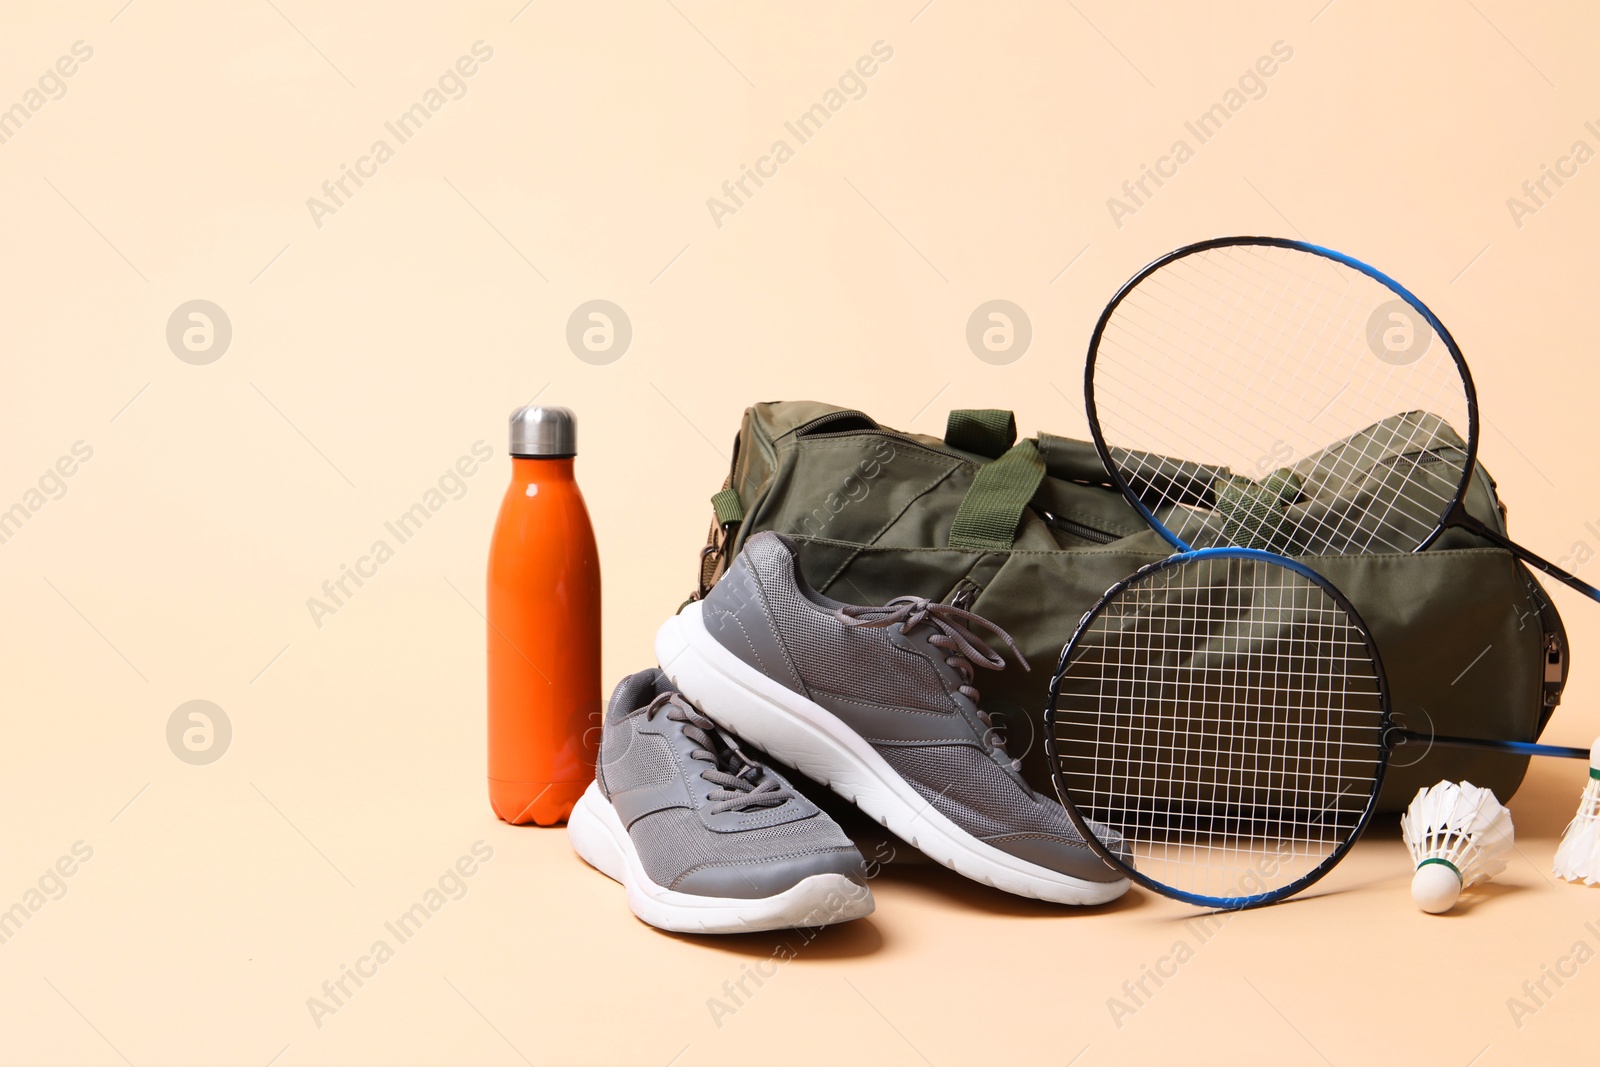 Photo of Badminton set, bag, sneakers and bottle on beige background, space for text